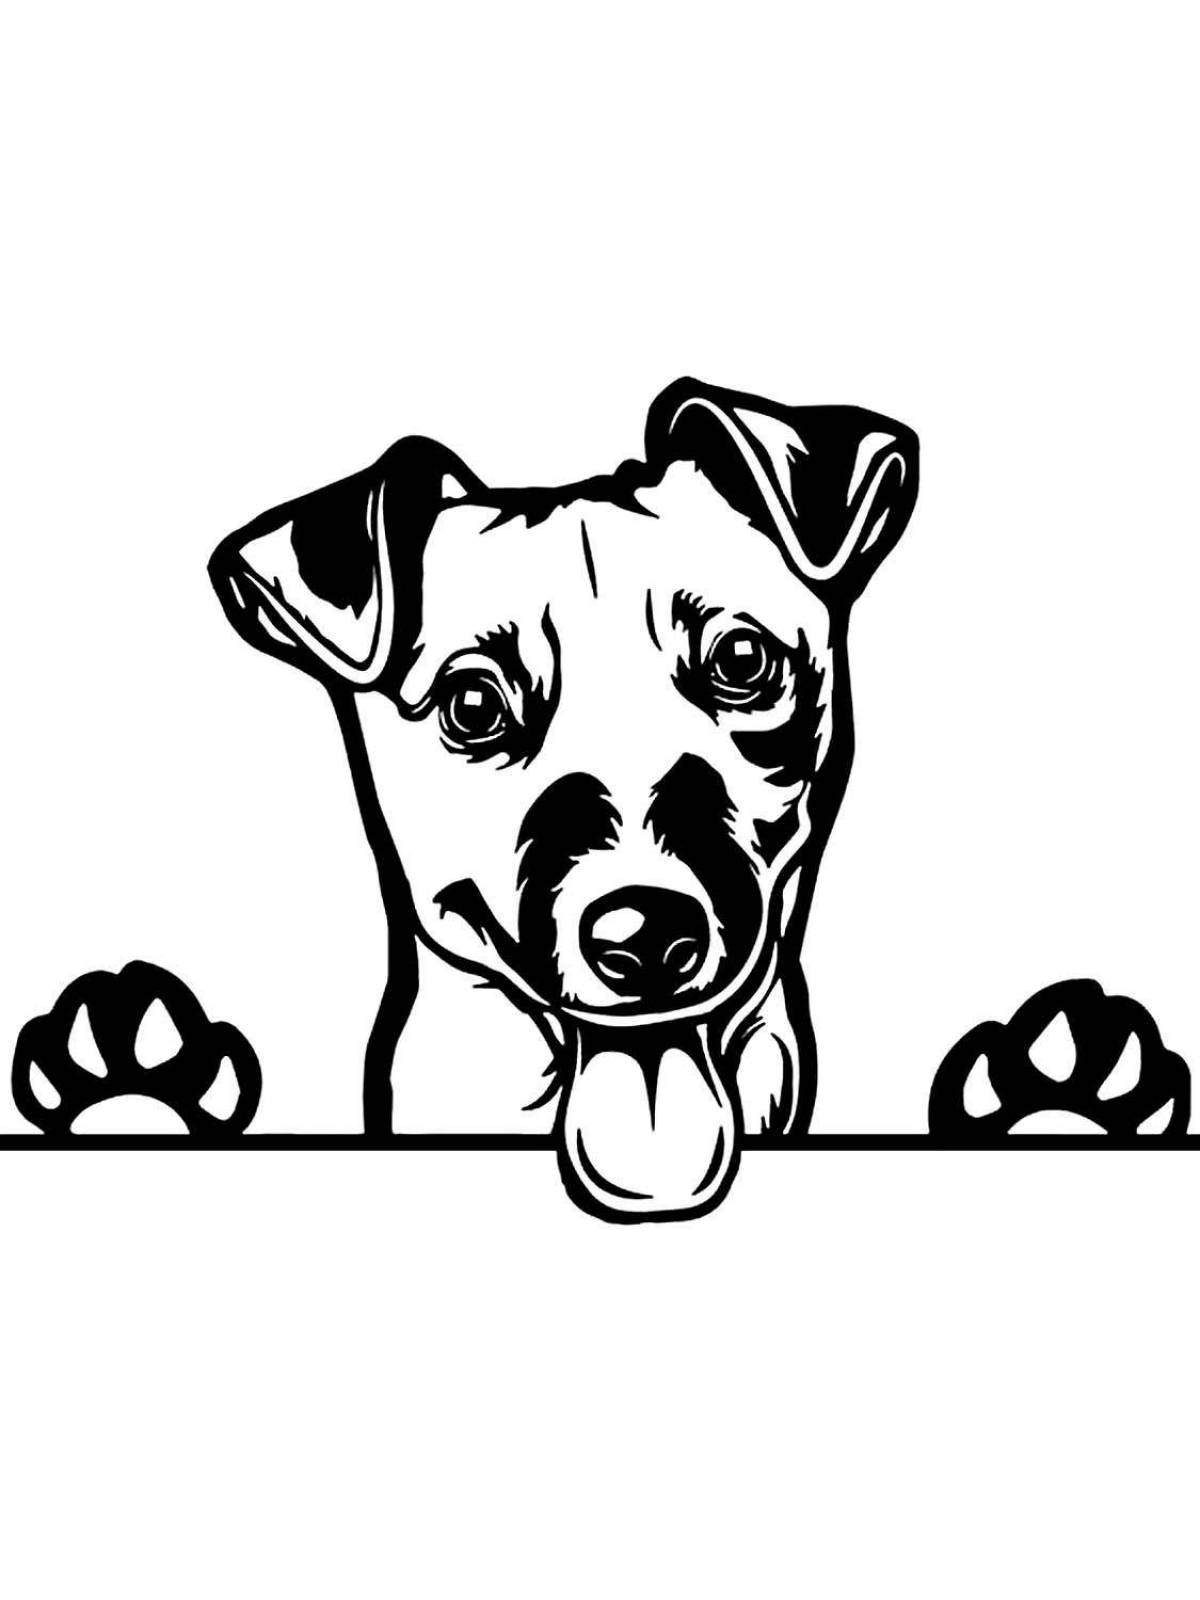 Impressive jack russell terrier coloring page